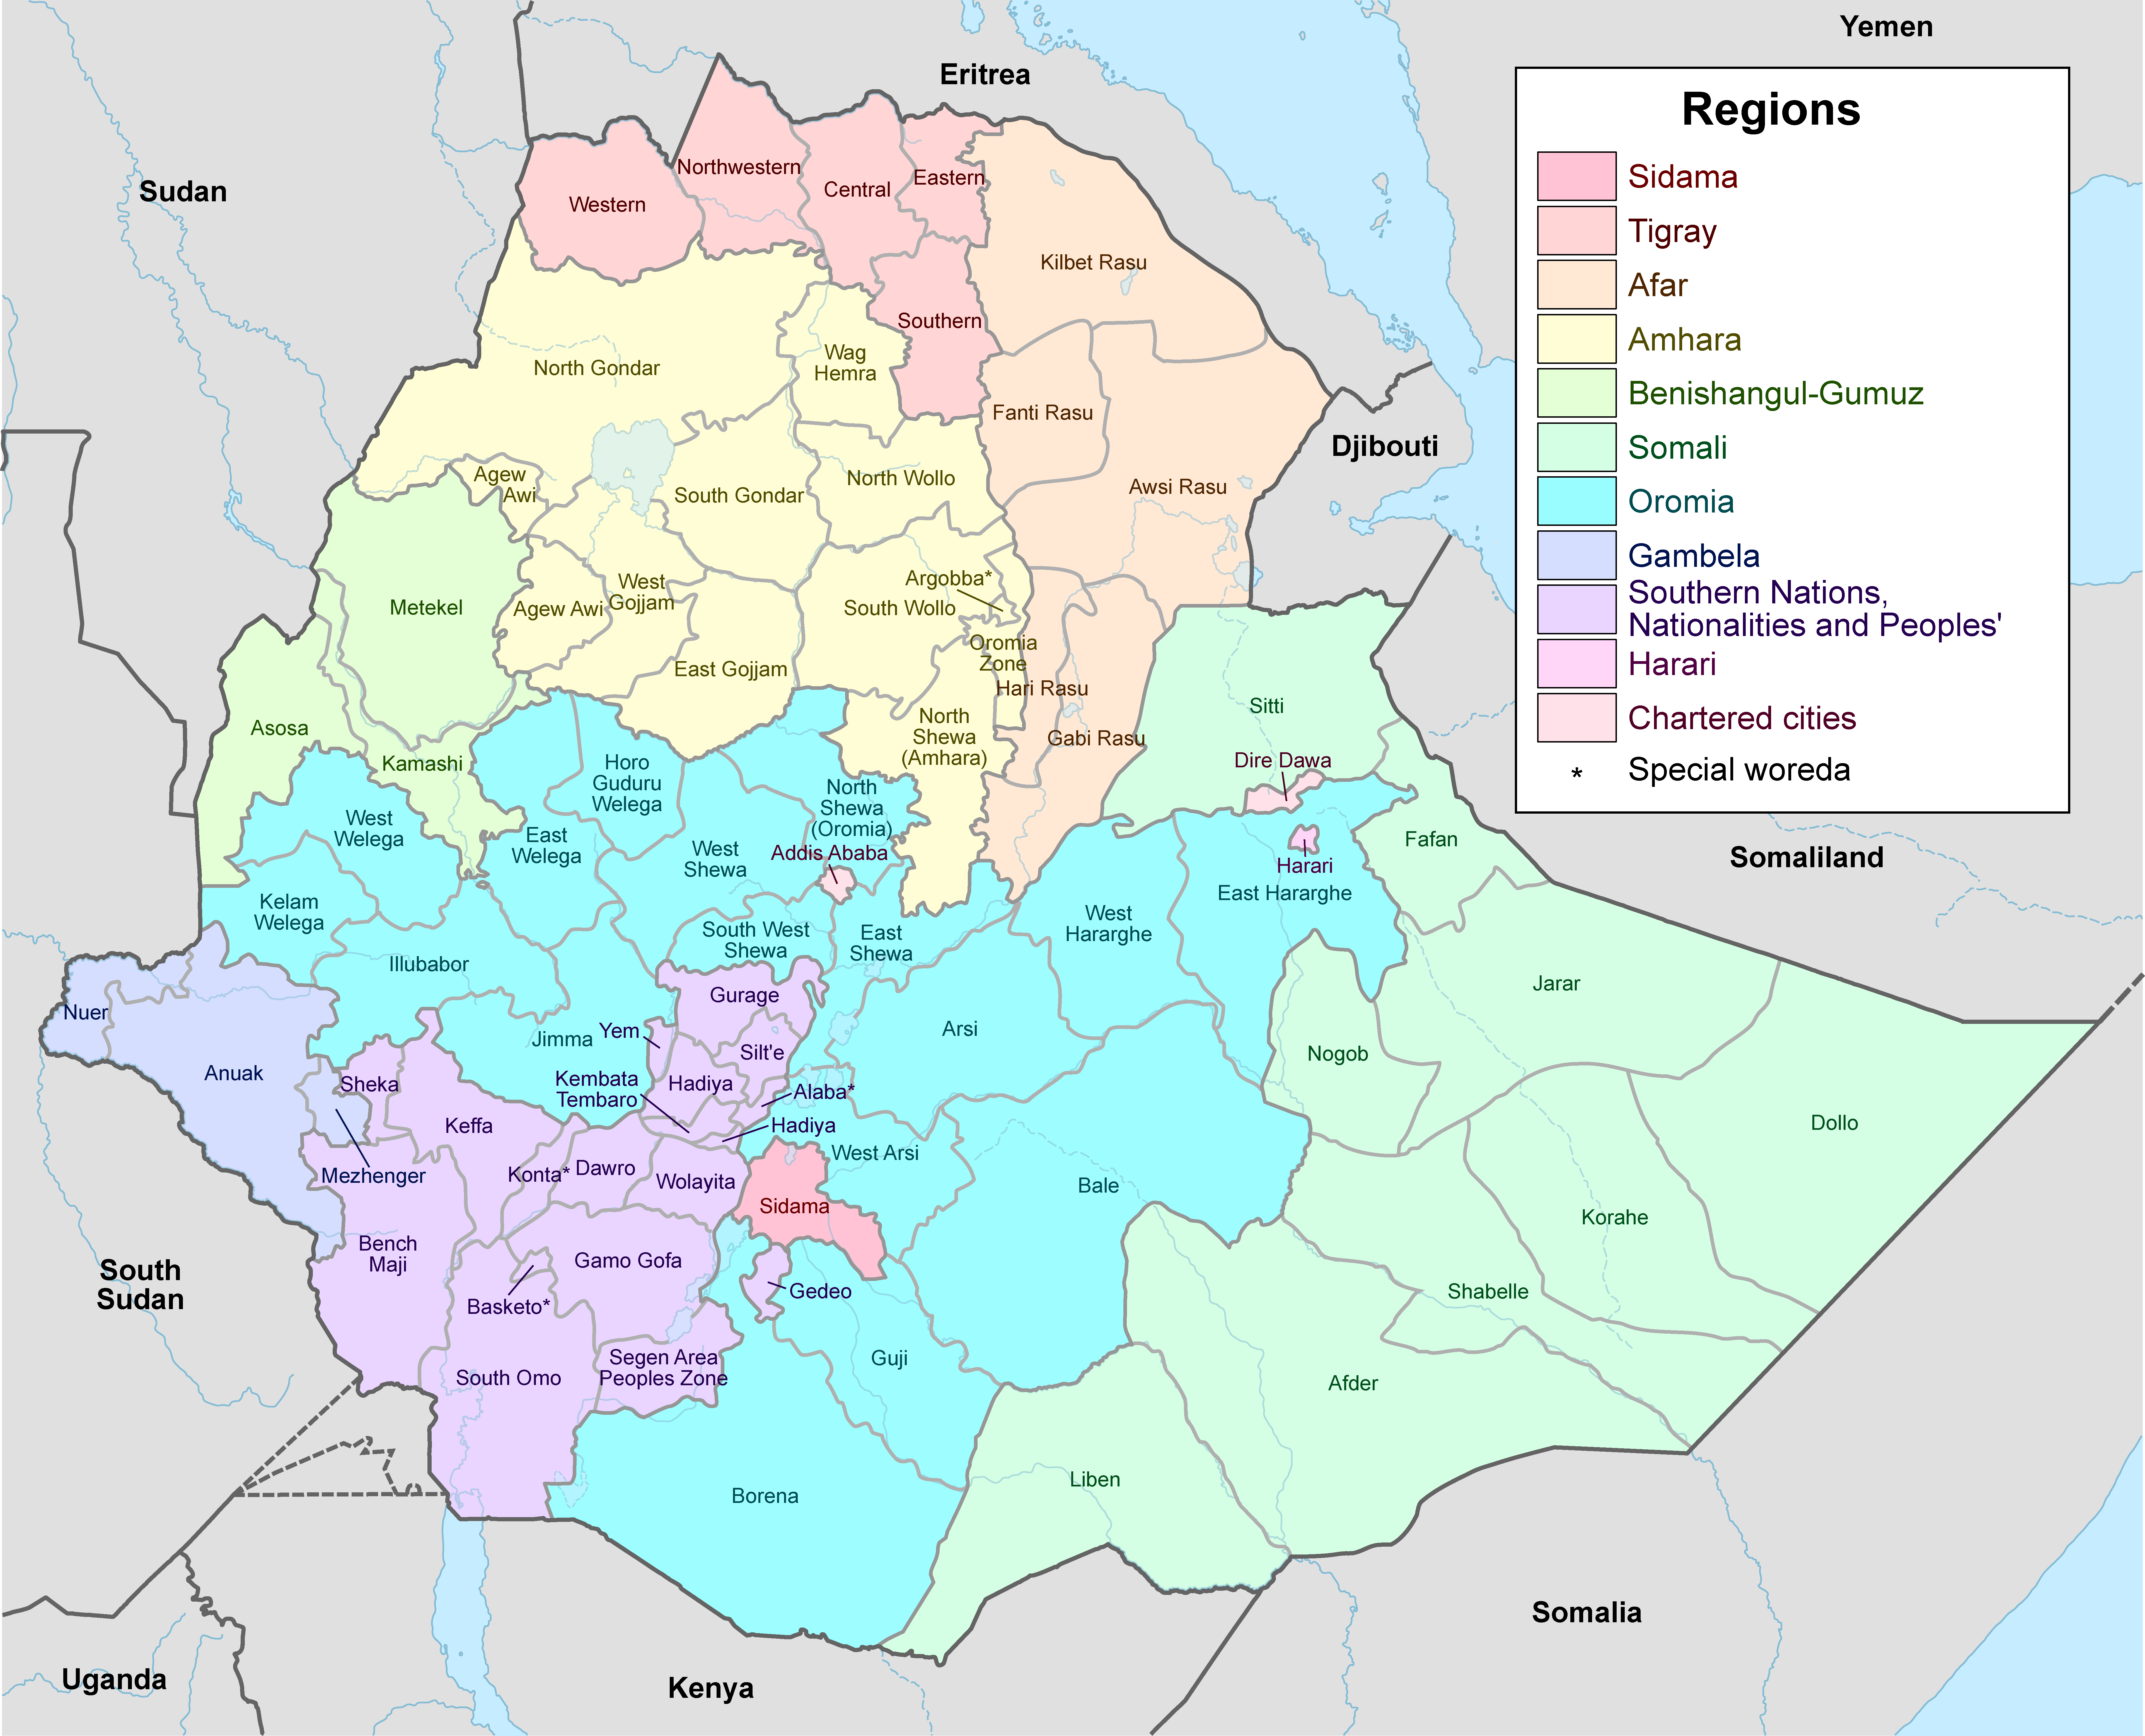 A map of Ethiopia and its regions